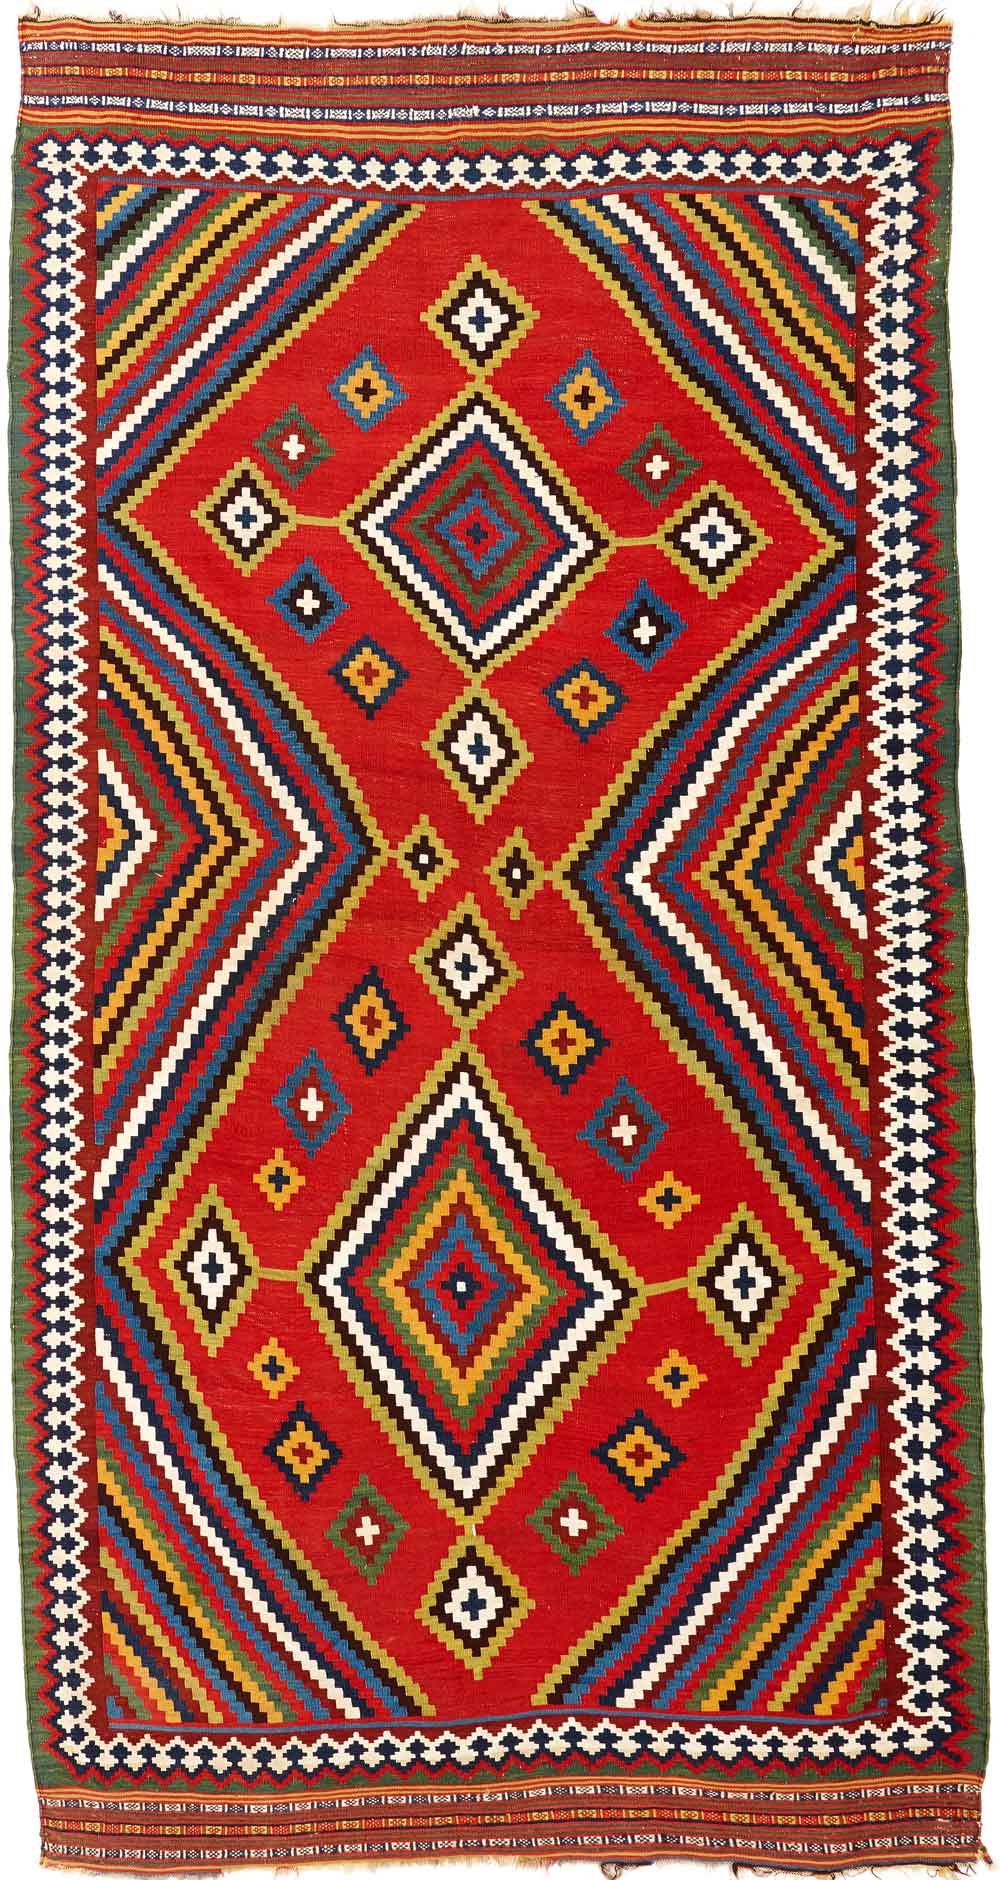 Qashqa'i kilim, Yalameh tribe, 19th century South-Persia, Fars region, 156 x 276 cm. Neiriz Collection on view in 100 Kilims at Halle Germany 